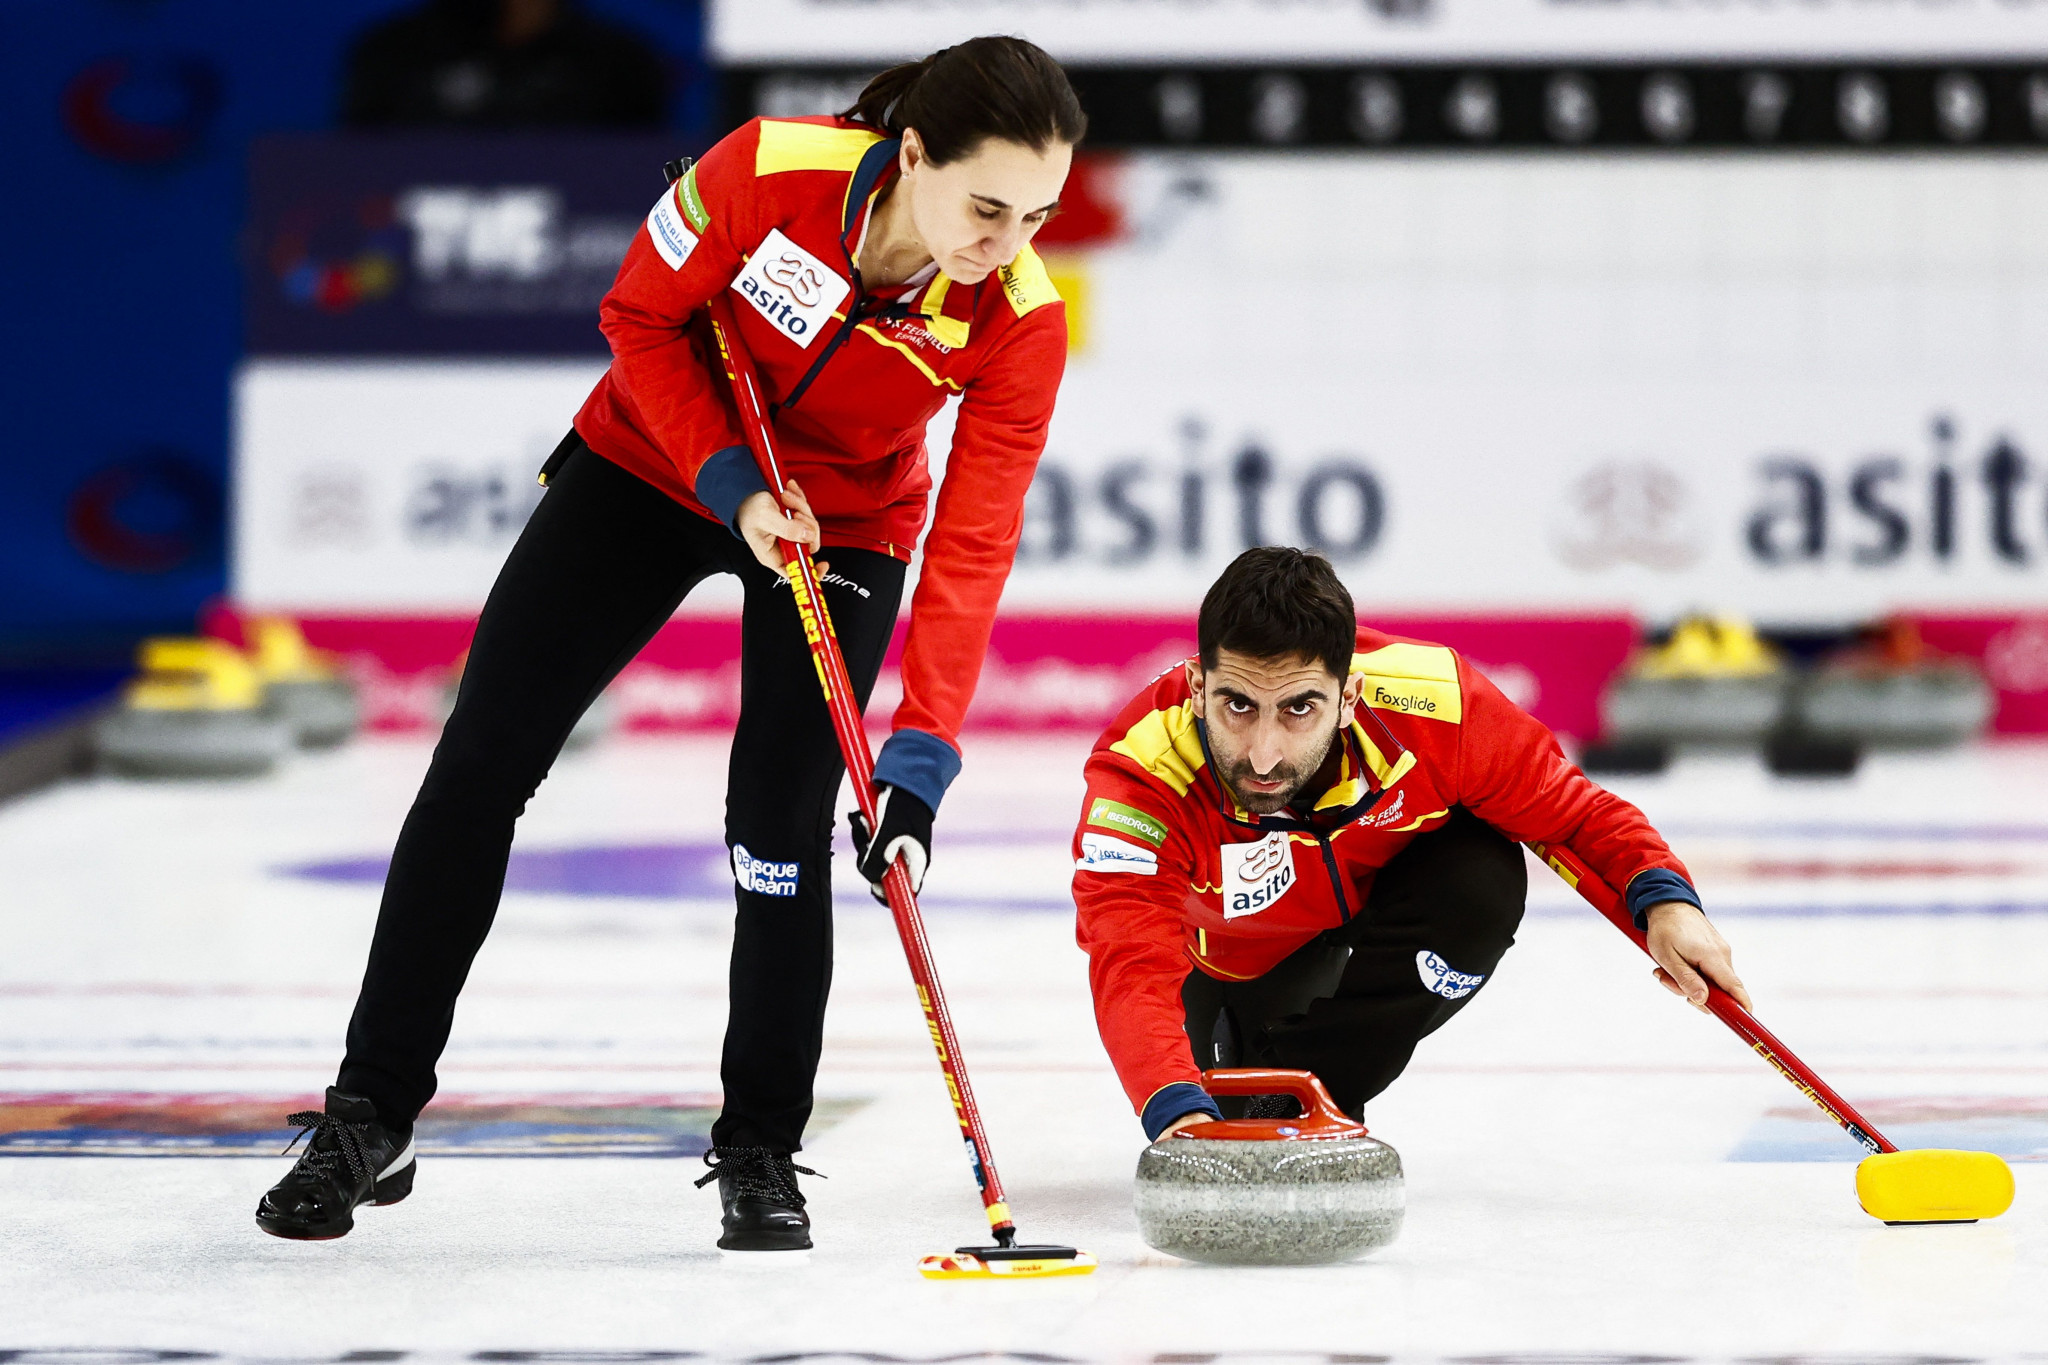 Seven teams remain unbeaten after third day of World Mixed Curling Championship